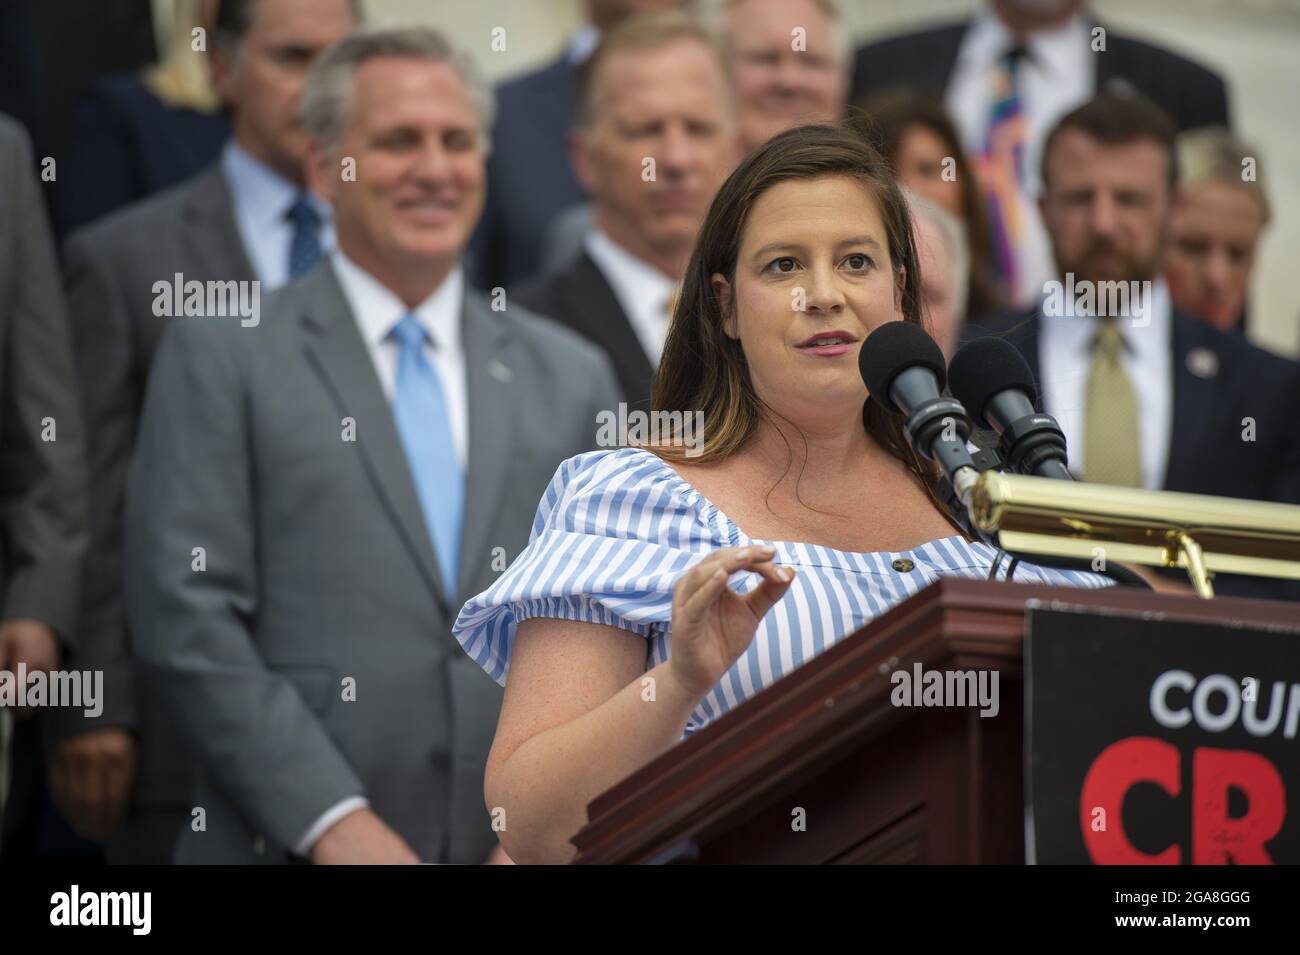 Washington, United States. 29th July, 2021. Republican Conference Chairwoman Elise Stefanik, R-N.Y., speaks during a a news conference with other House Republicans to discuss President Biden and Speaker of the House Nancy Pelosi, D-Calif., before the district work period begins in August at the US Capitol in Washington, DC., on Thursday, July 29, 2021. Photo by Bonnie Cash/UPI Credit: UPI/Alamy Live News Stock Photo